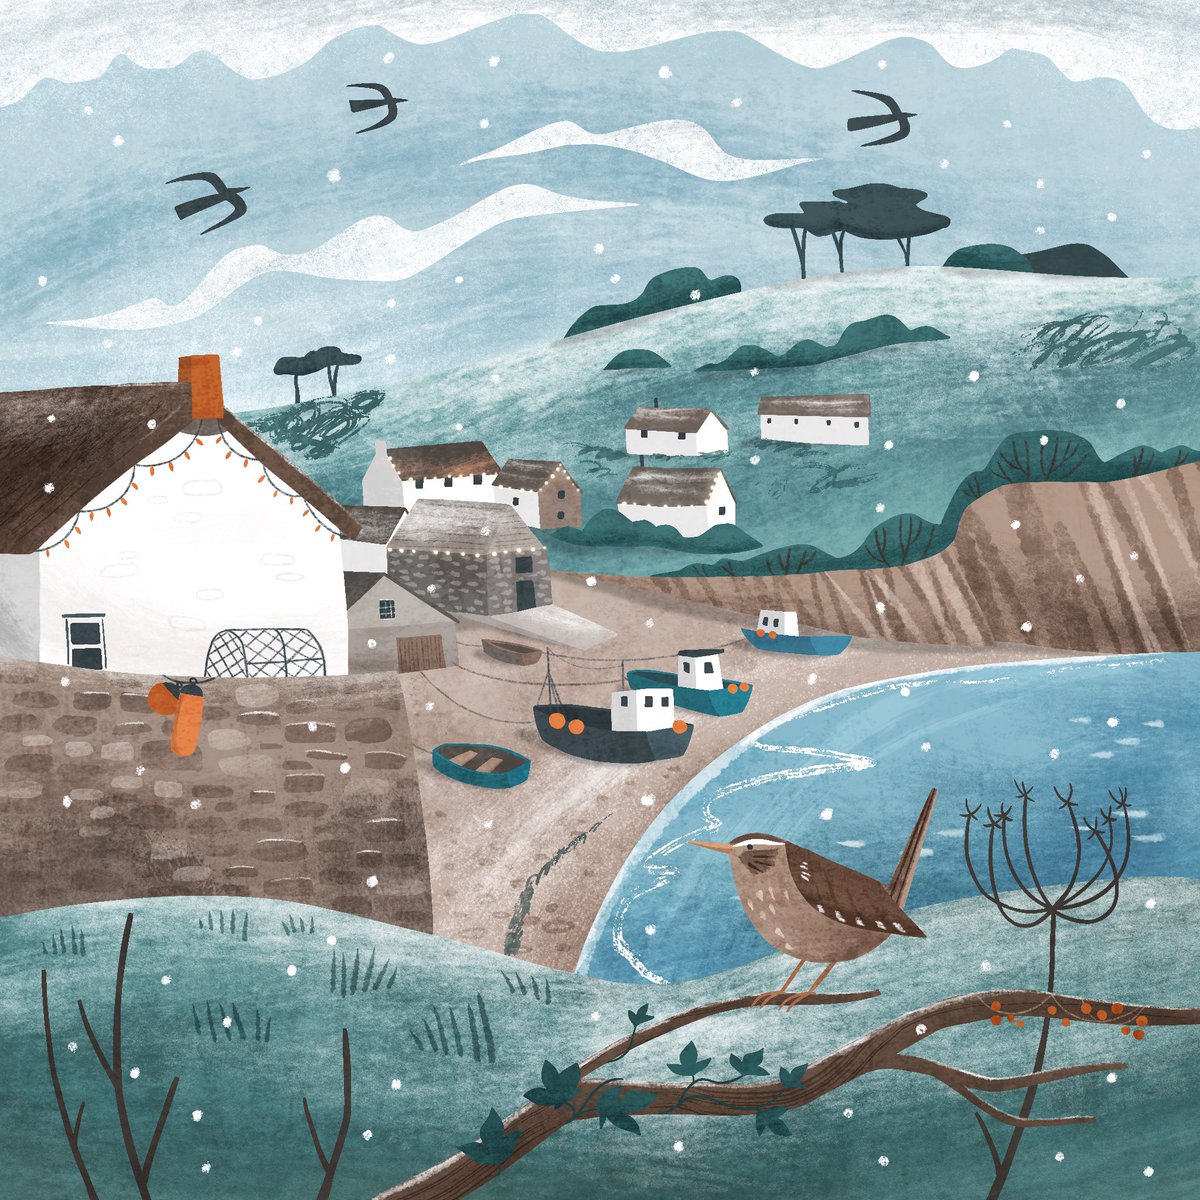 Cadgwith at Christmas. Available as part of a Christmas card set from my shop hollyastle.co.uk/shop